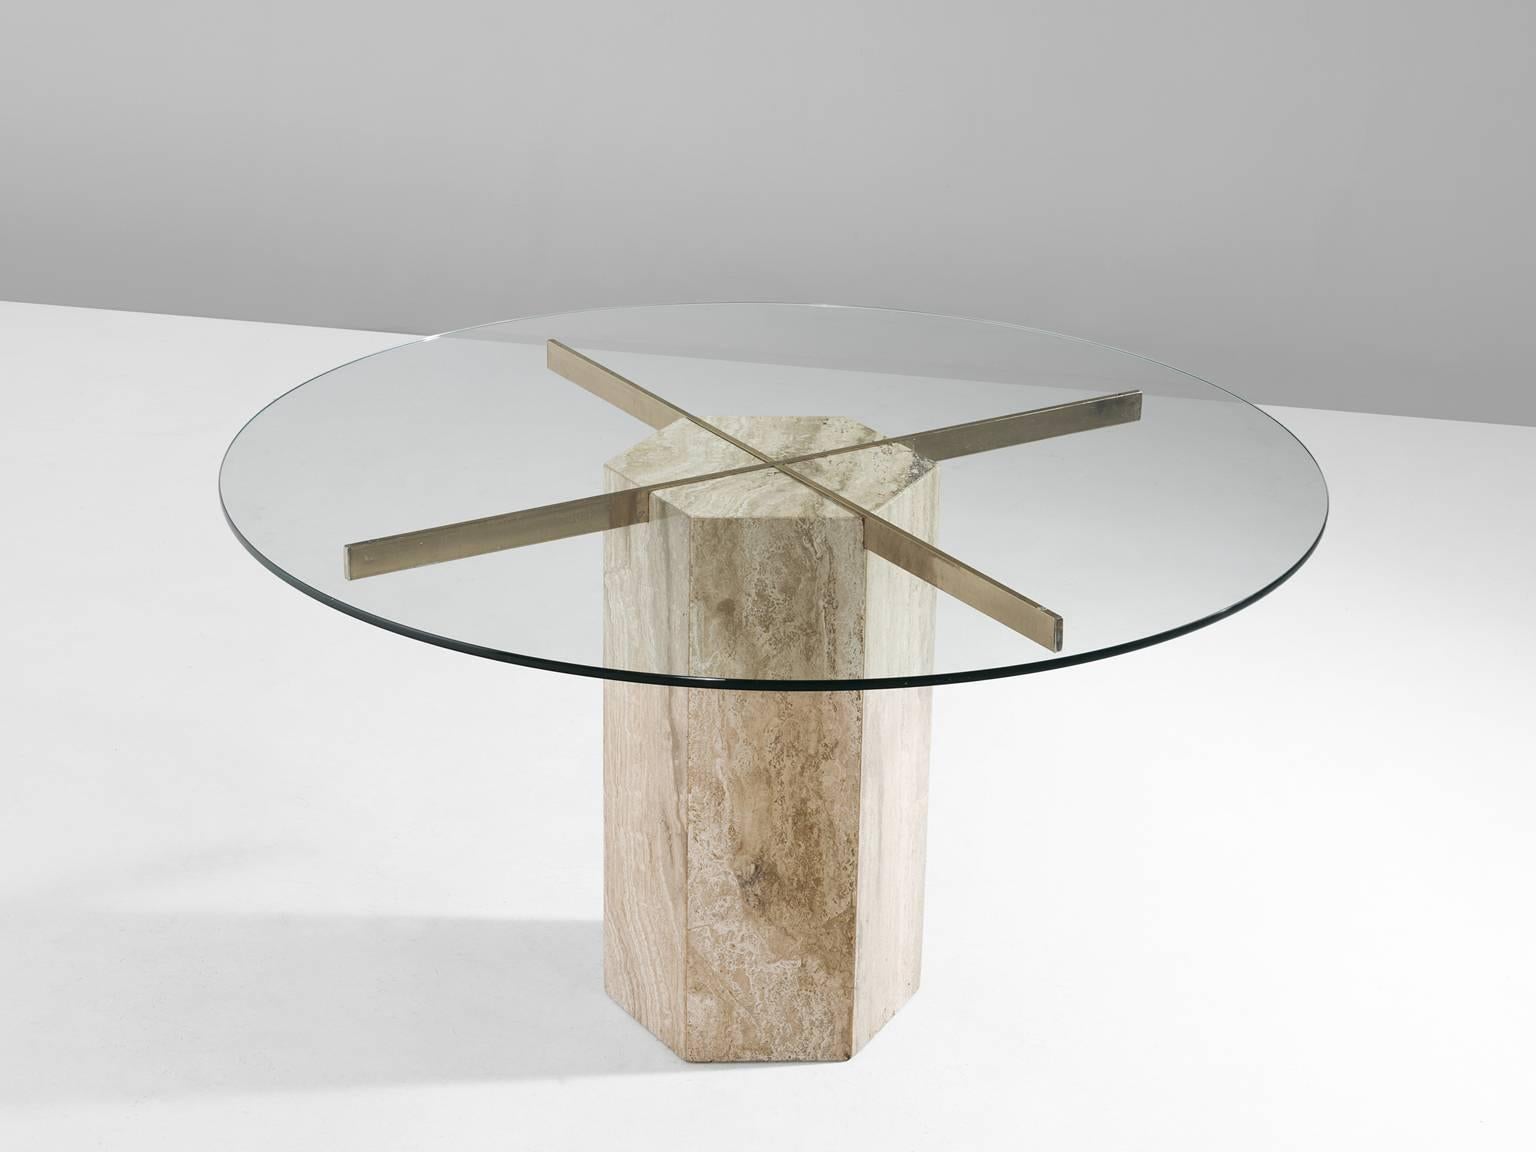 Dining table, in travertine, glass and brass, Italy, 1970s.

Luxurious Italian dining table. The table has a travertine base with a brass cross, which holds the round clear glass top. Due the clear glass, the brass and travertine are beautiful